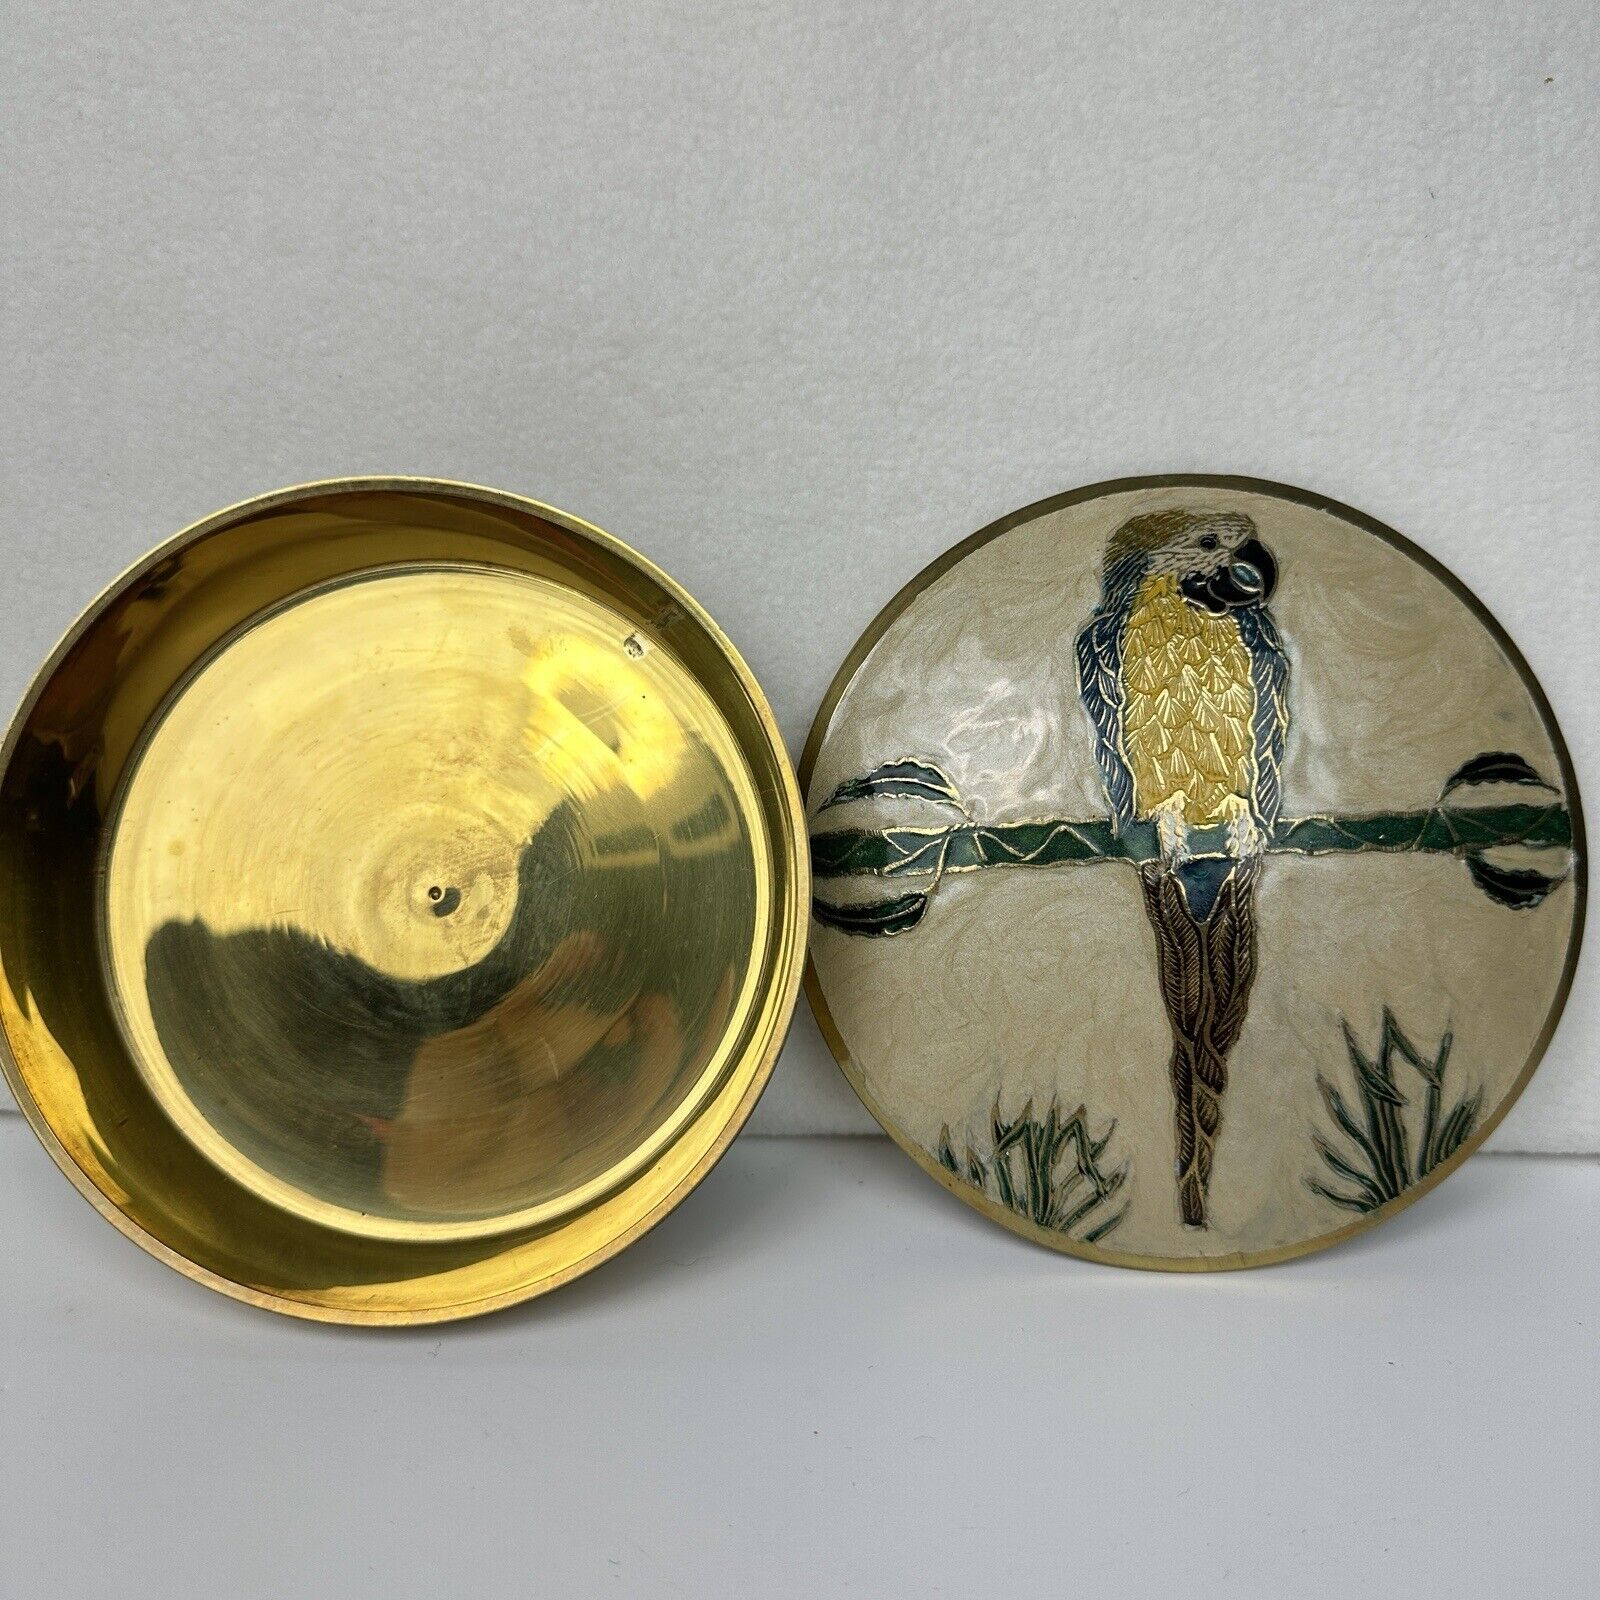 Trinket Dish Parrot Colorful Brass w/ Lid Round Home Decor Vtg Jewelry Box India